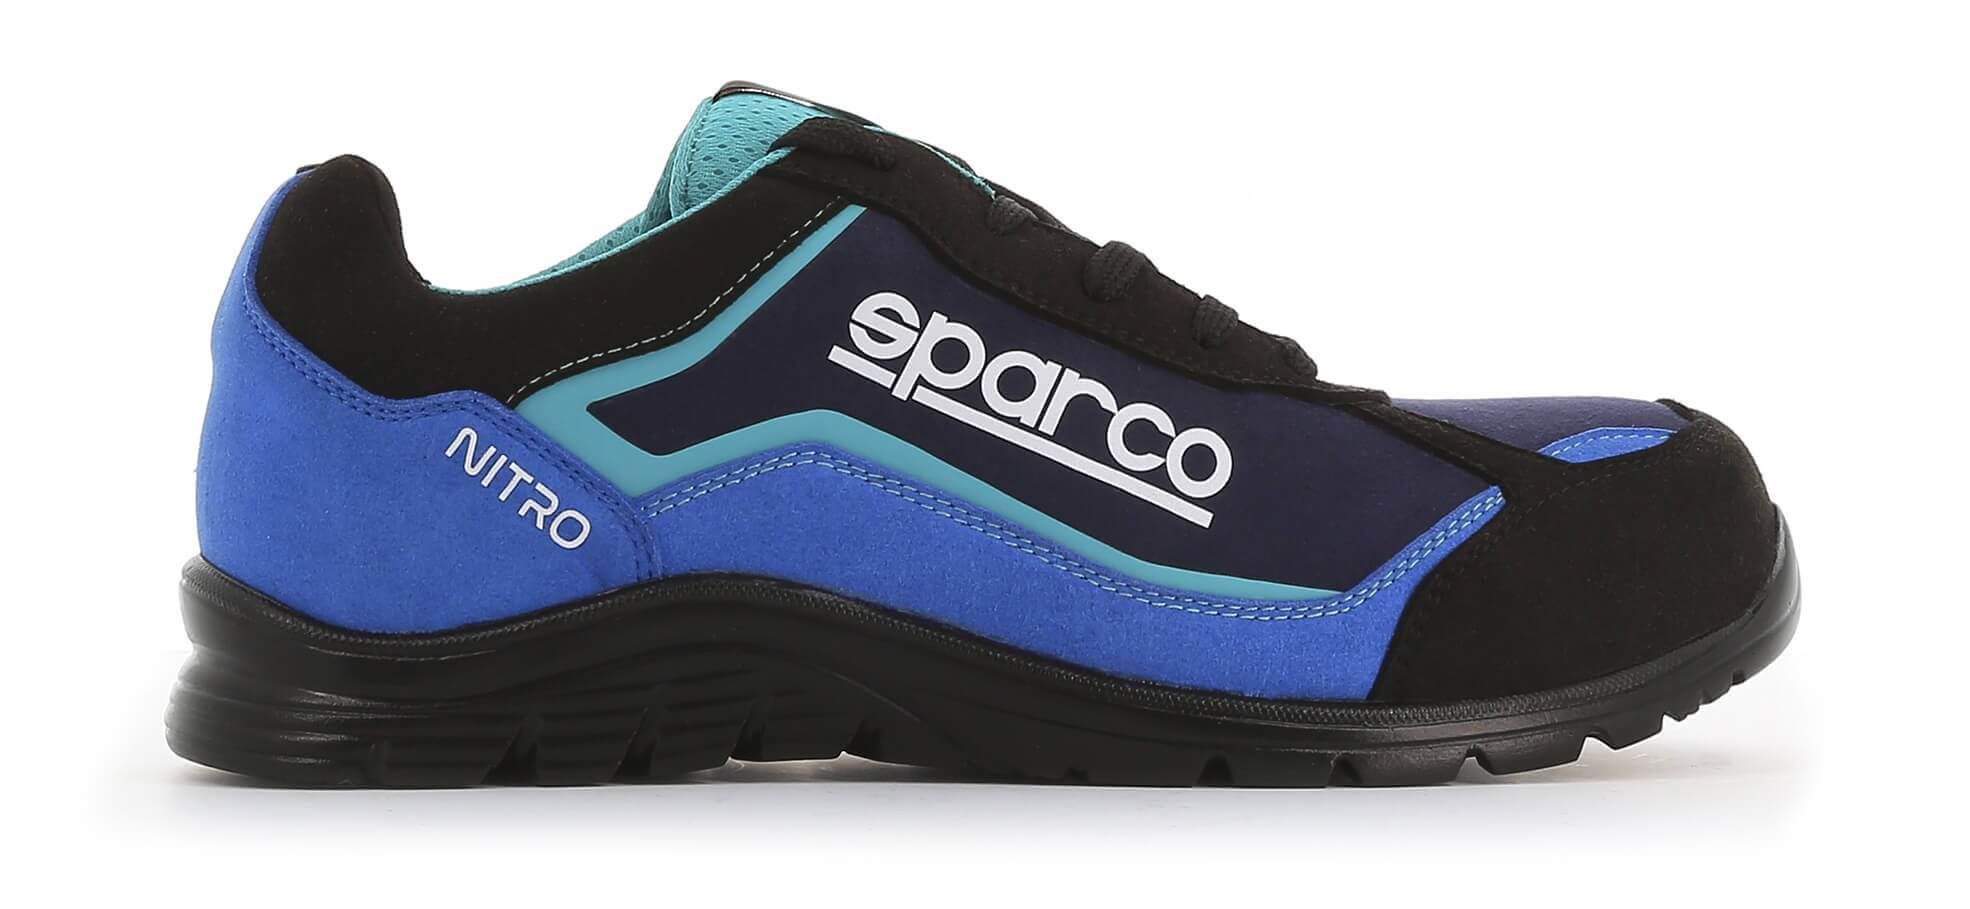 Sparco Chaussures Nitro S3 Black/Gris Taille 46 